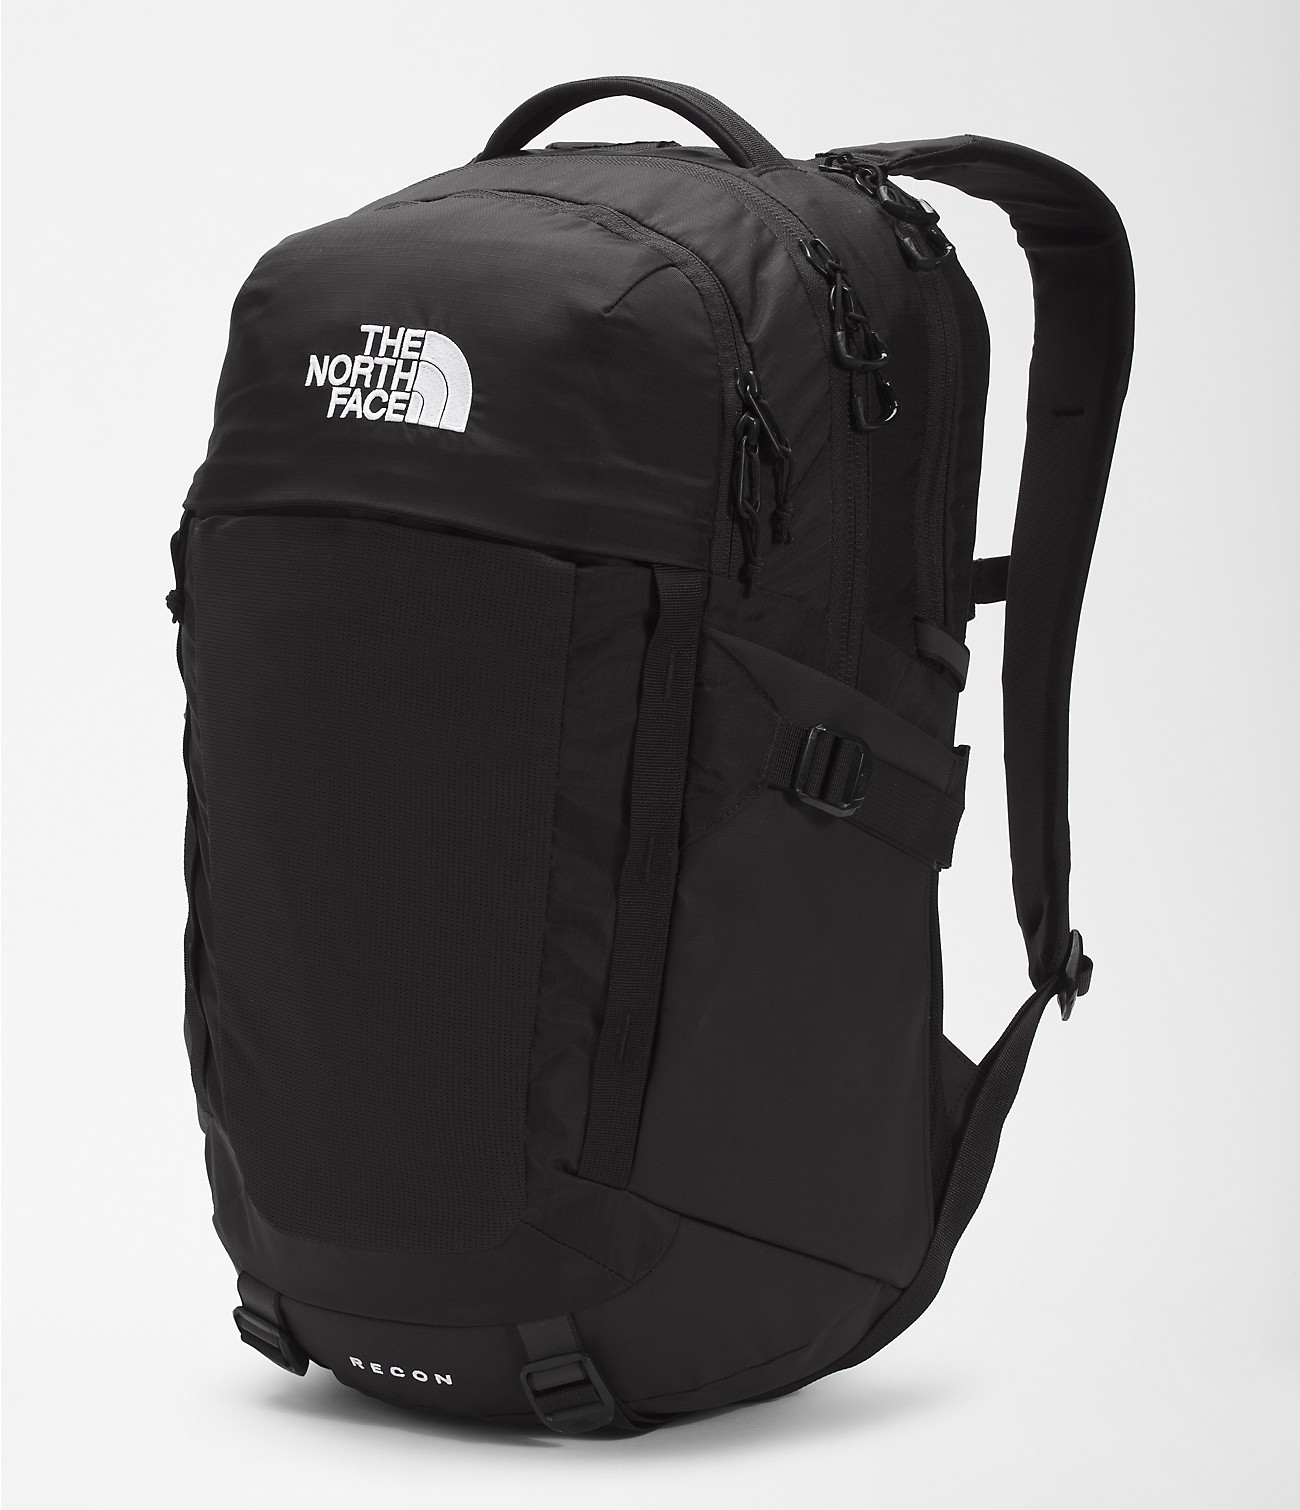 Unlock Wilderness' choice in the Thule Vs North Face comparison, the Recon by The North Face